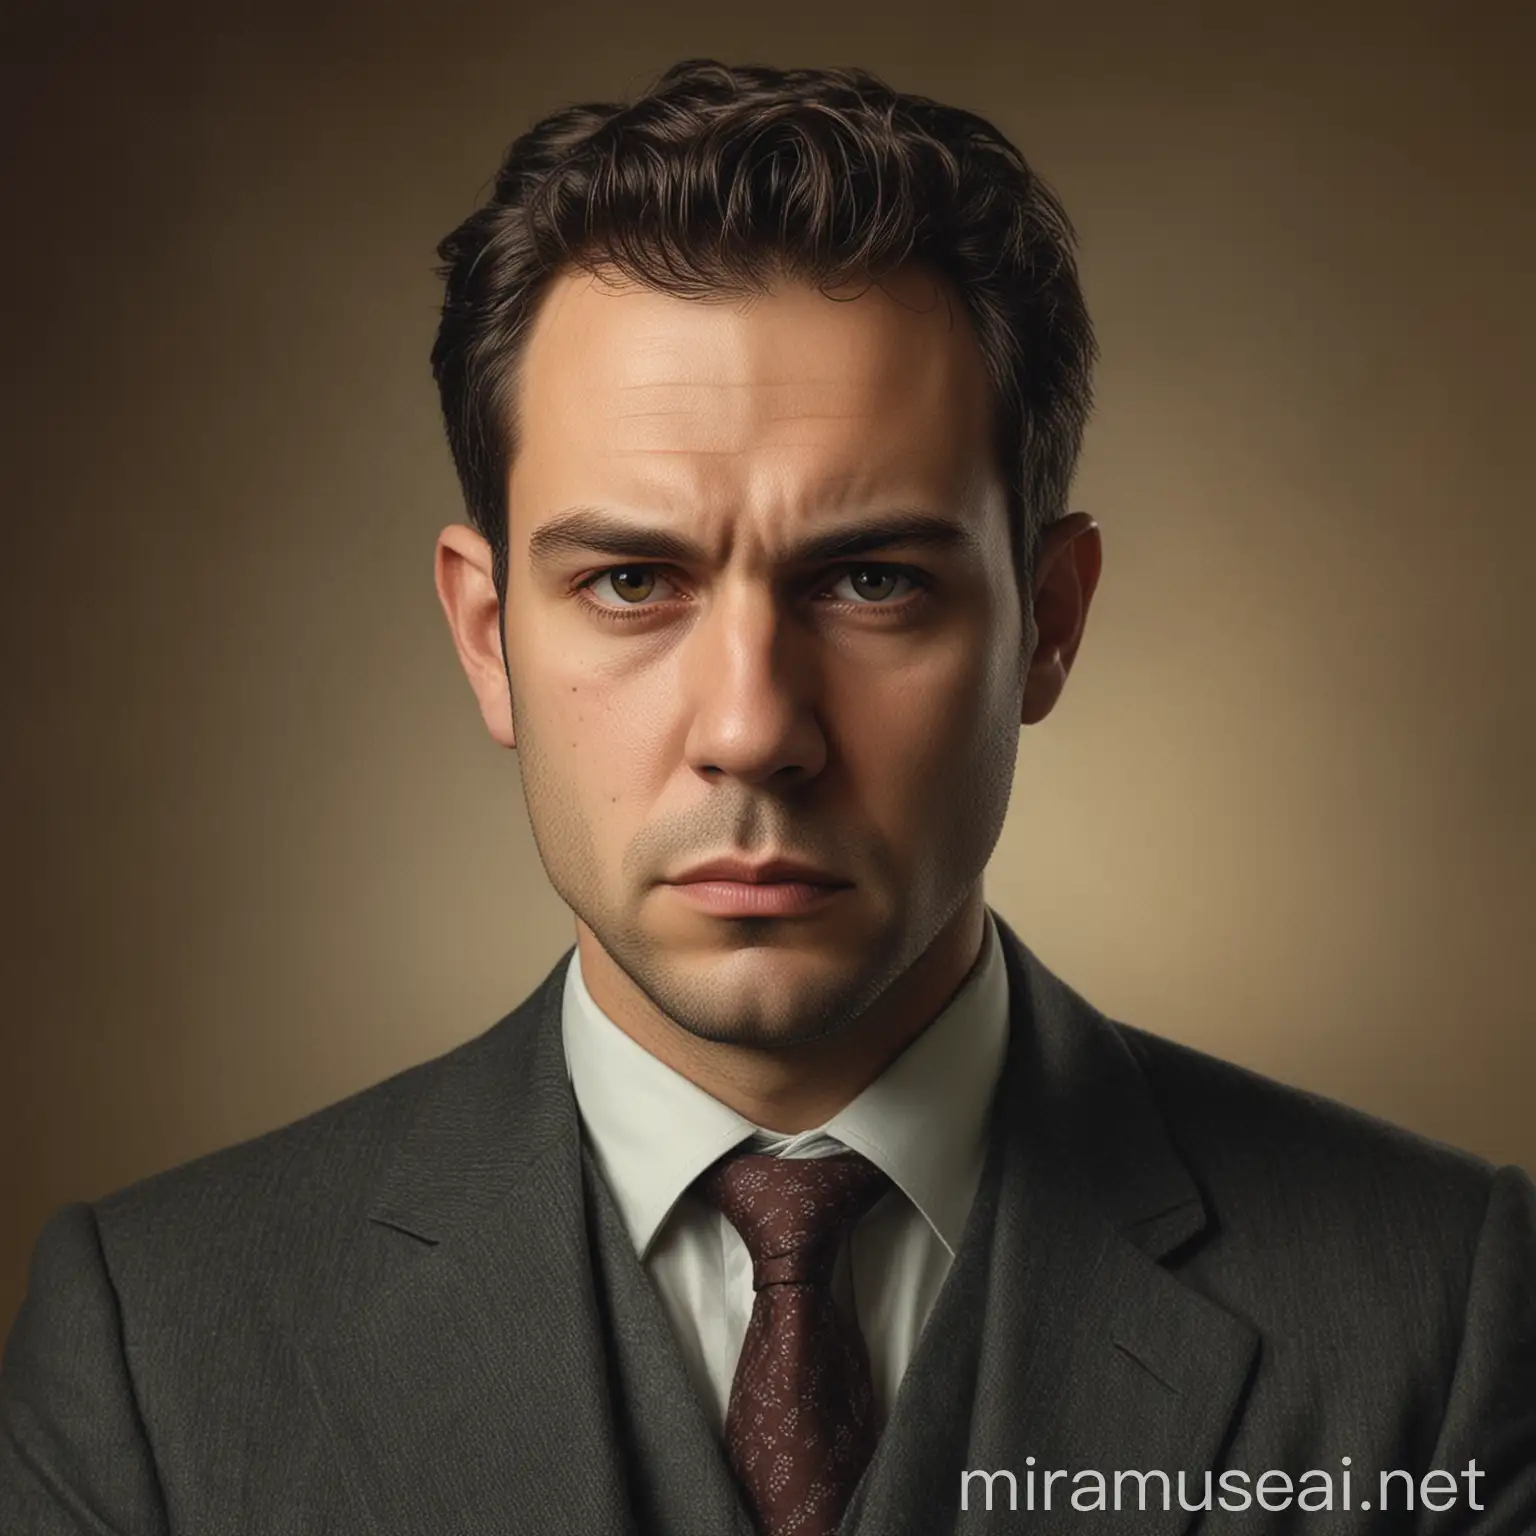 Serious Man Portrait with Intense Expression